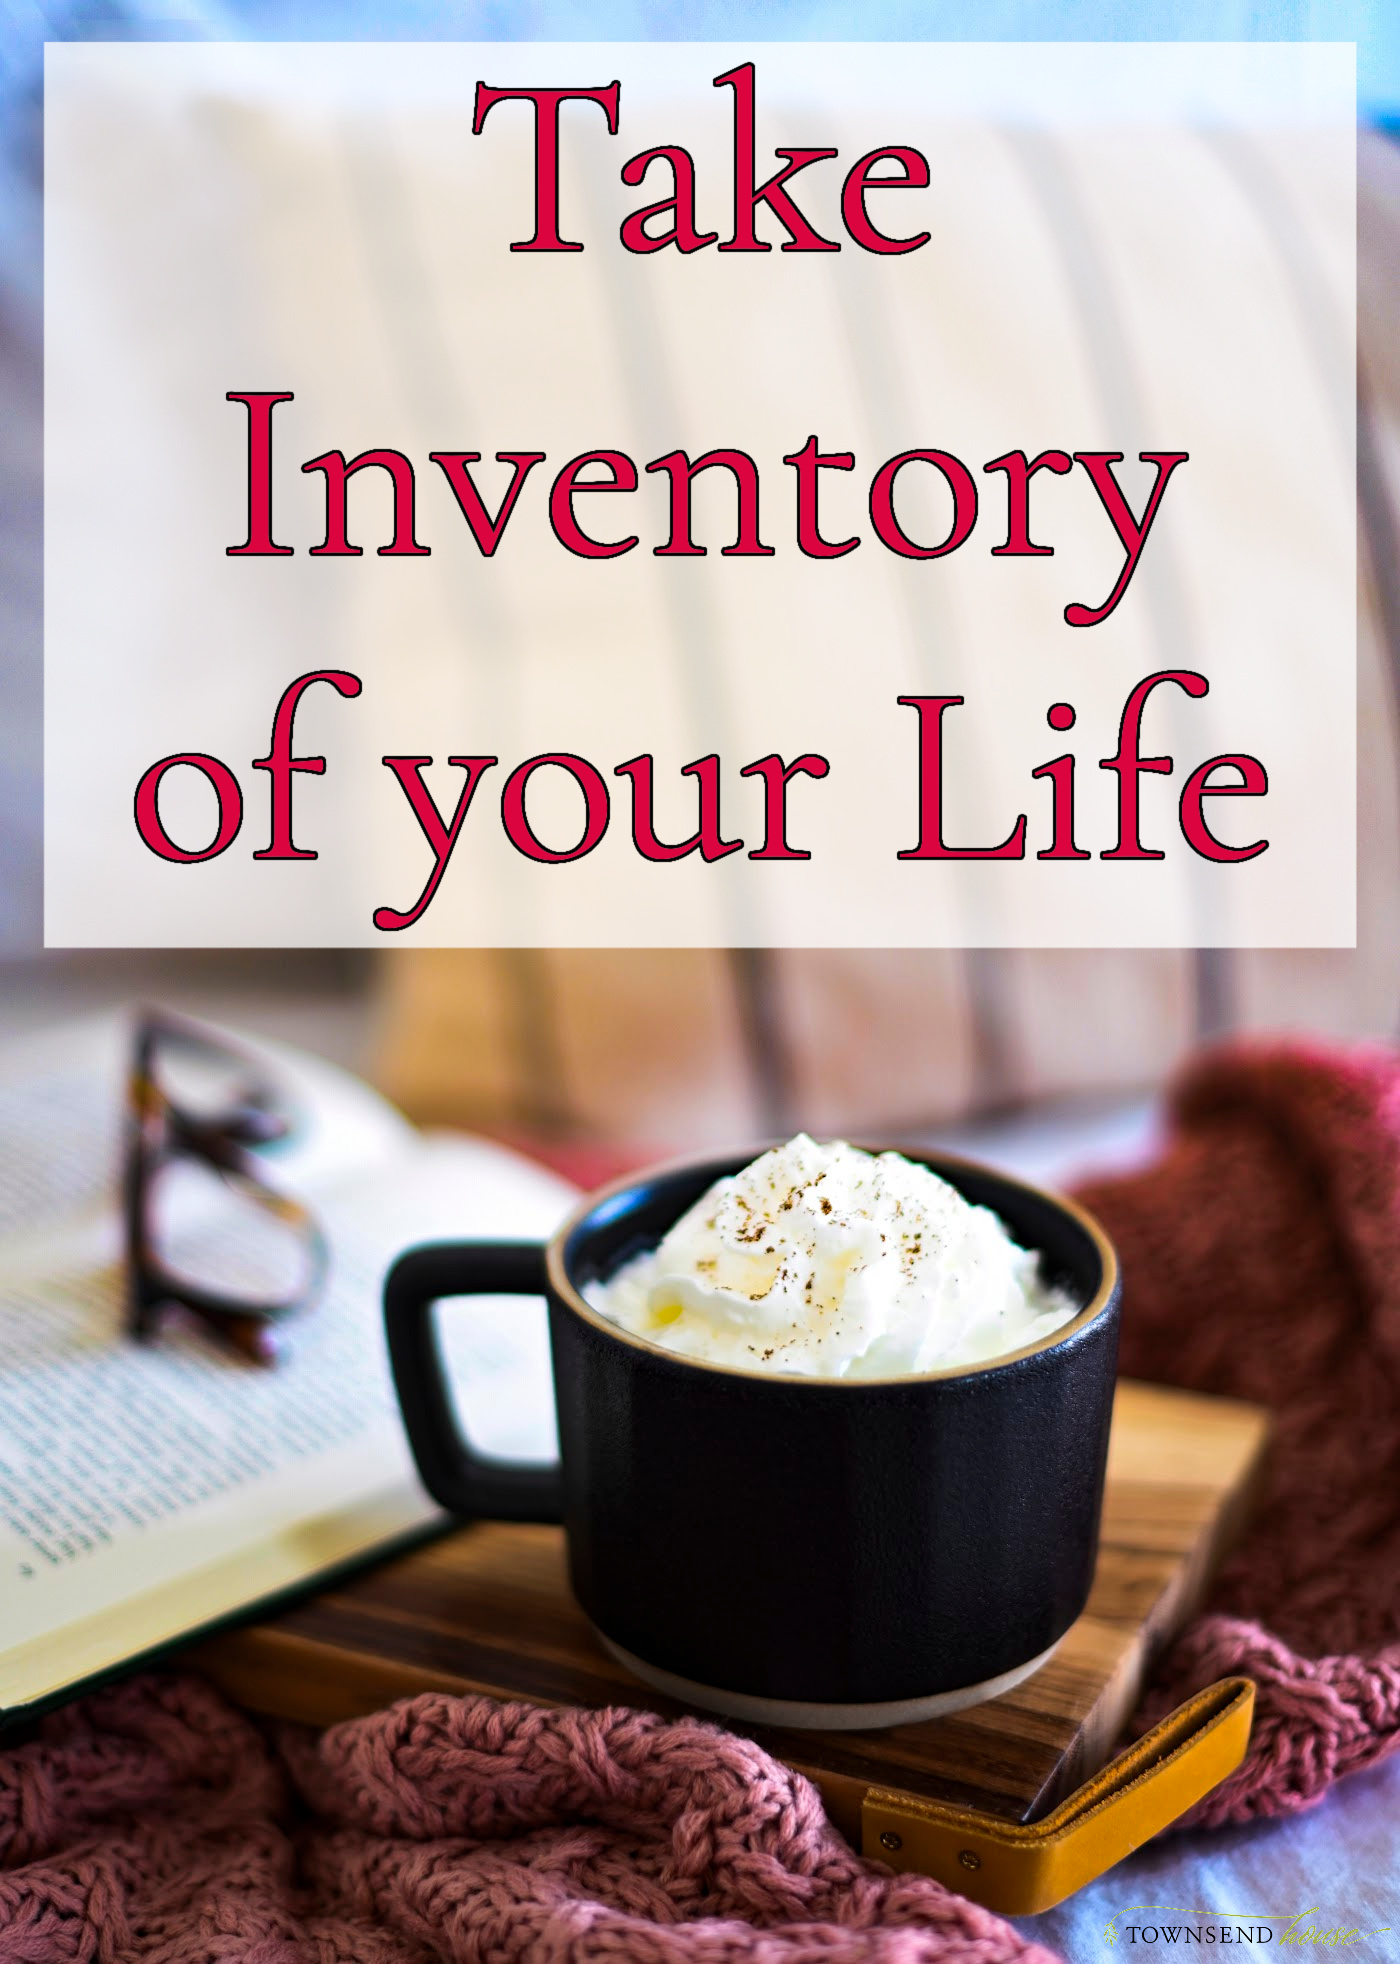 Take Inventory of Your Life